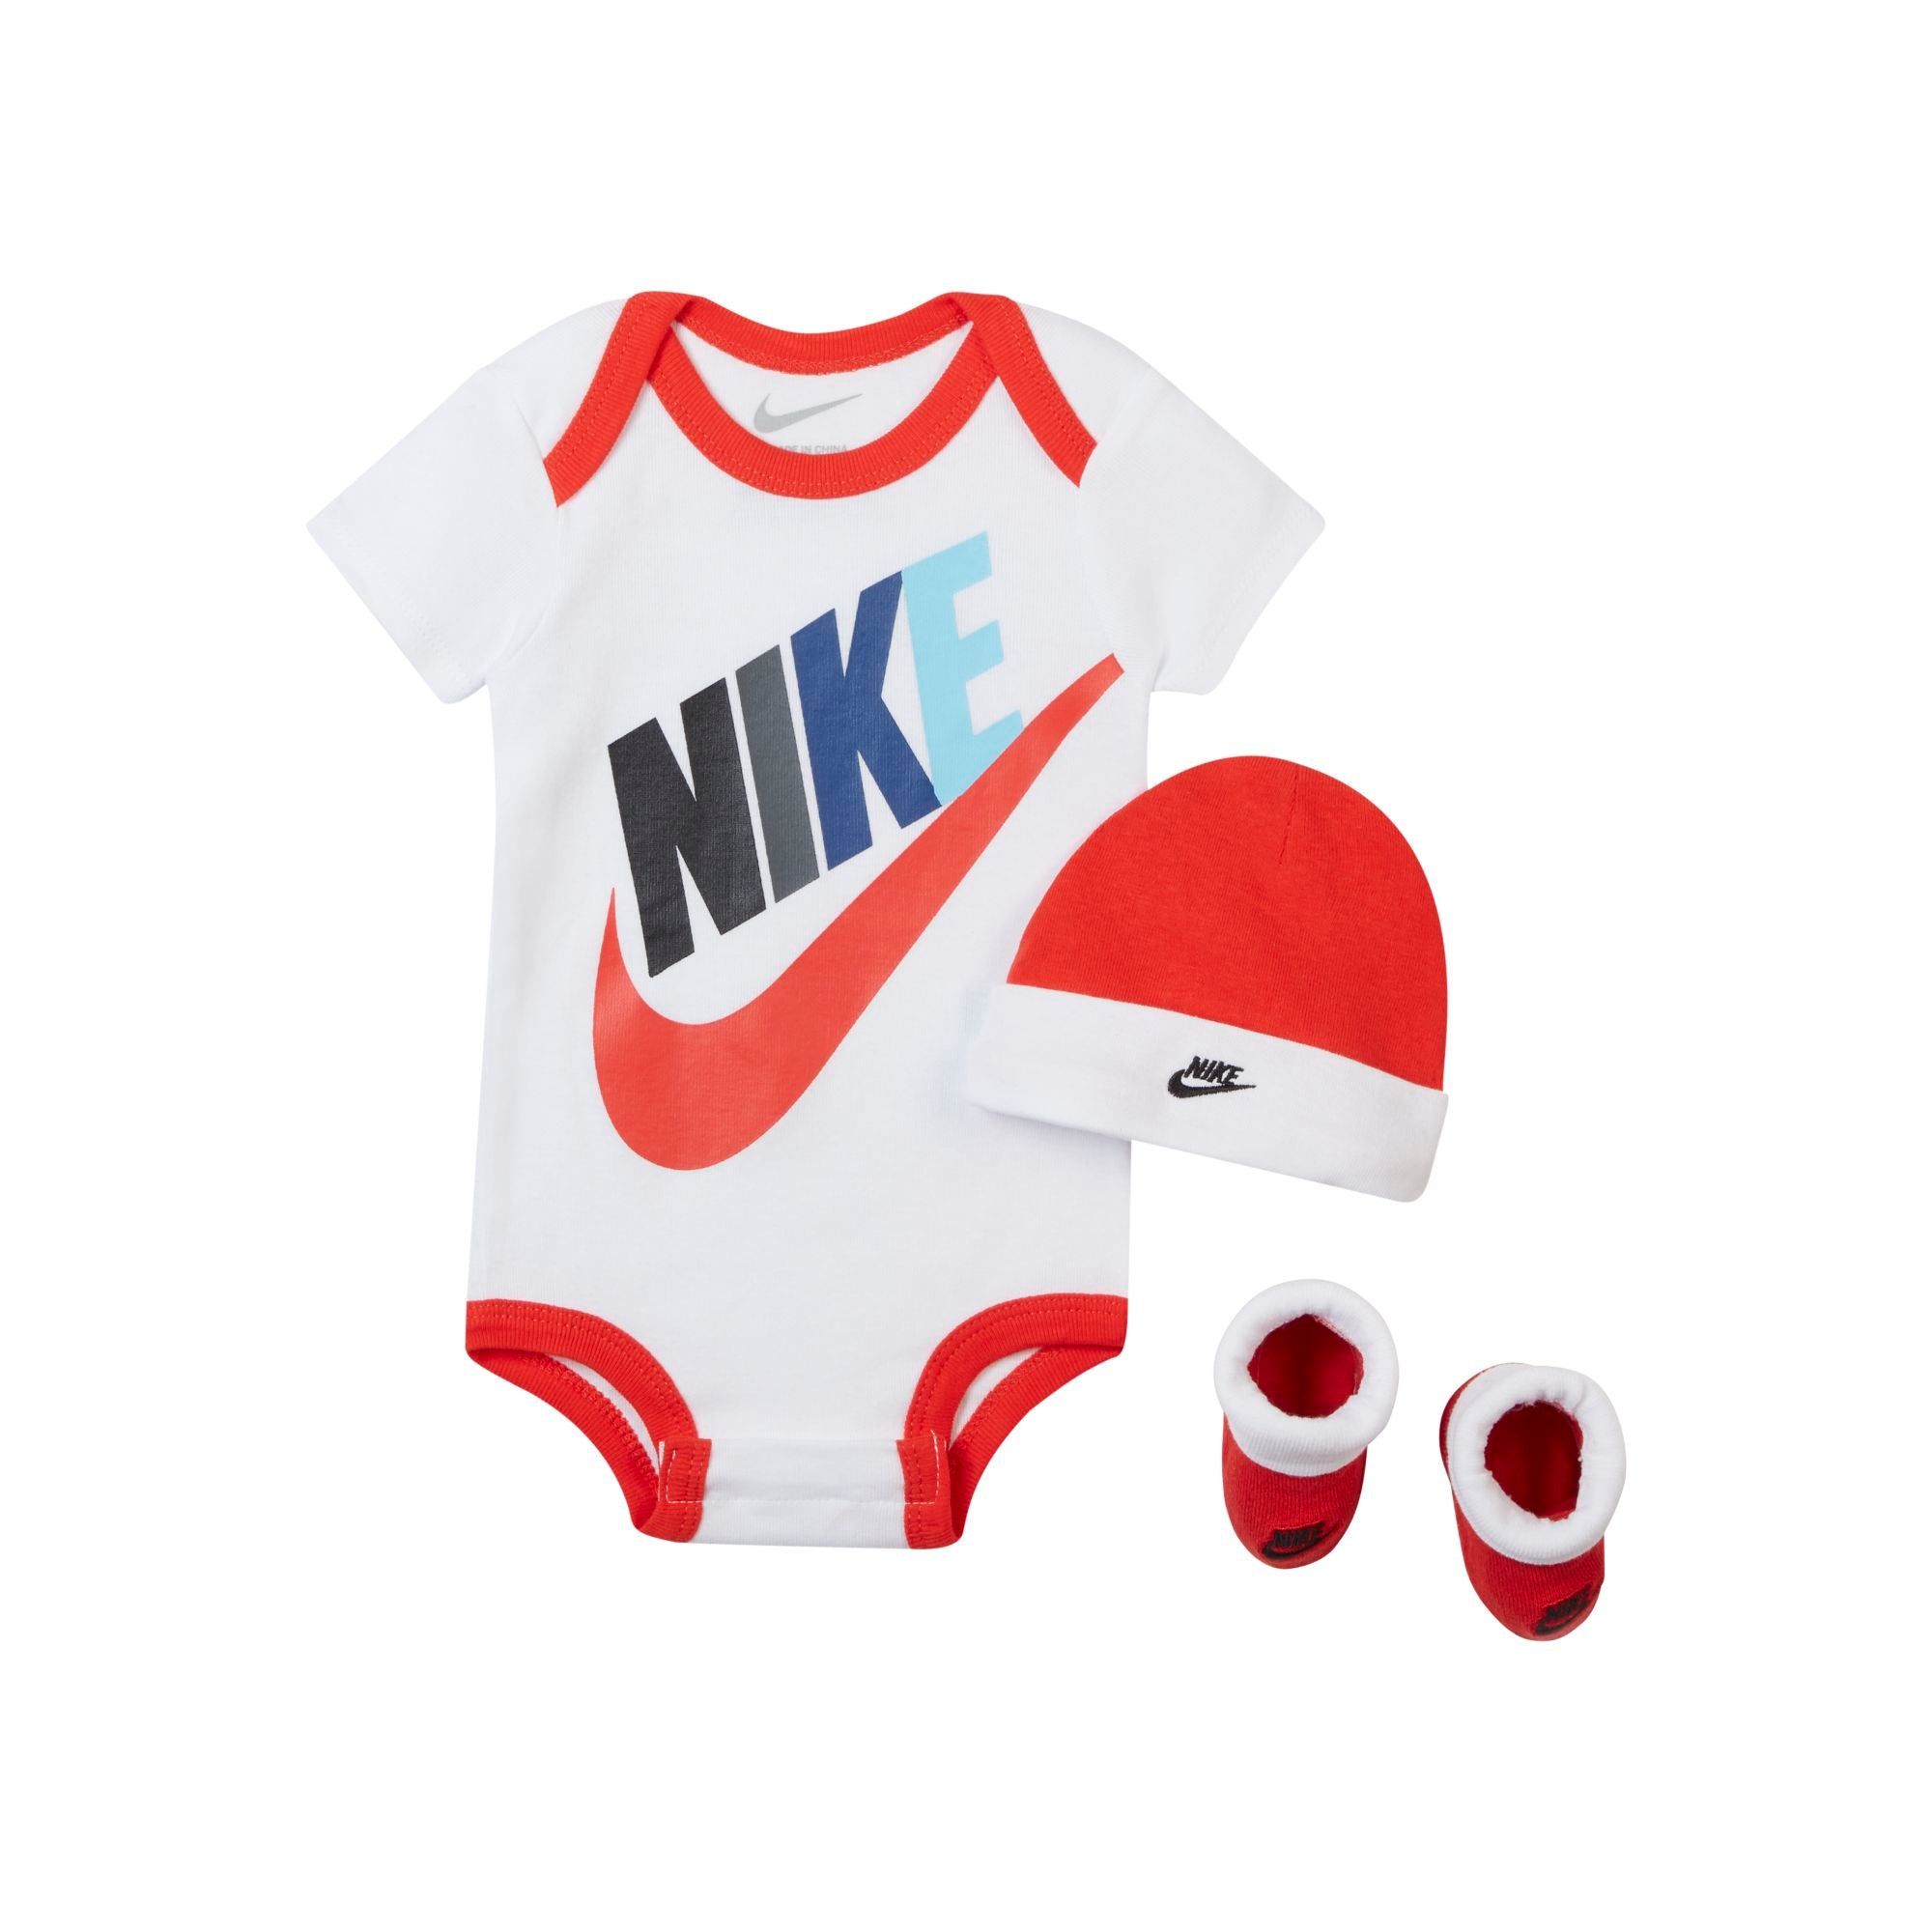 [LN0313-R4Y] Baby Nike Bodysuit, Hat and Booties 3-PC Box Set